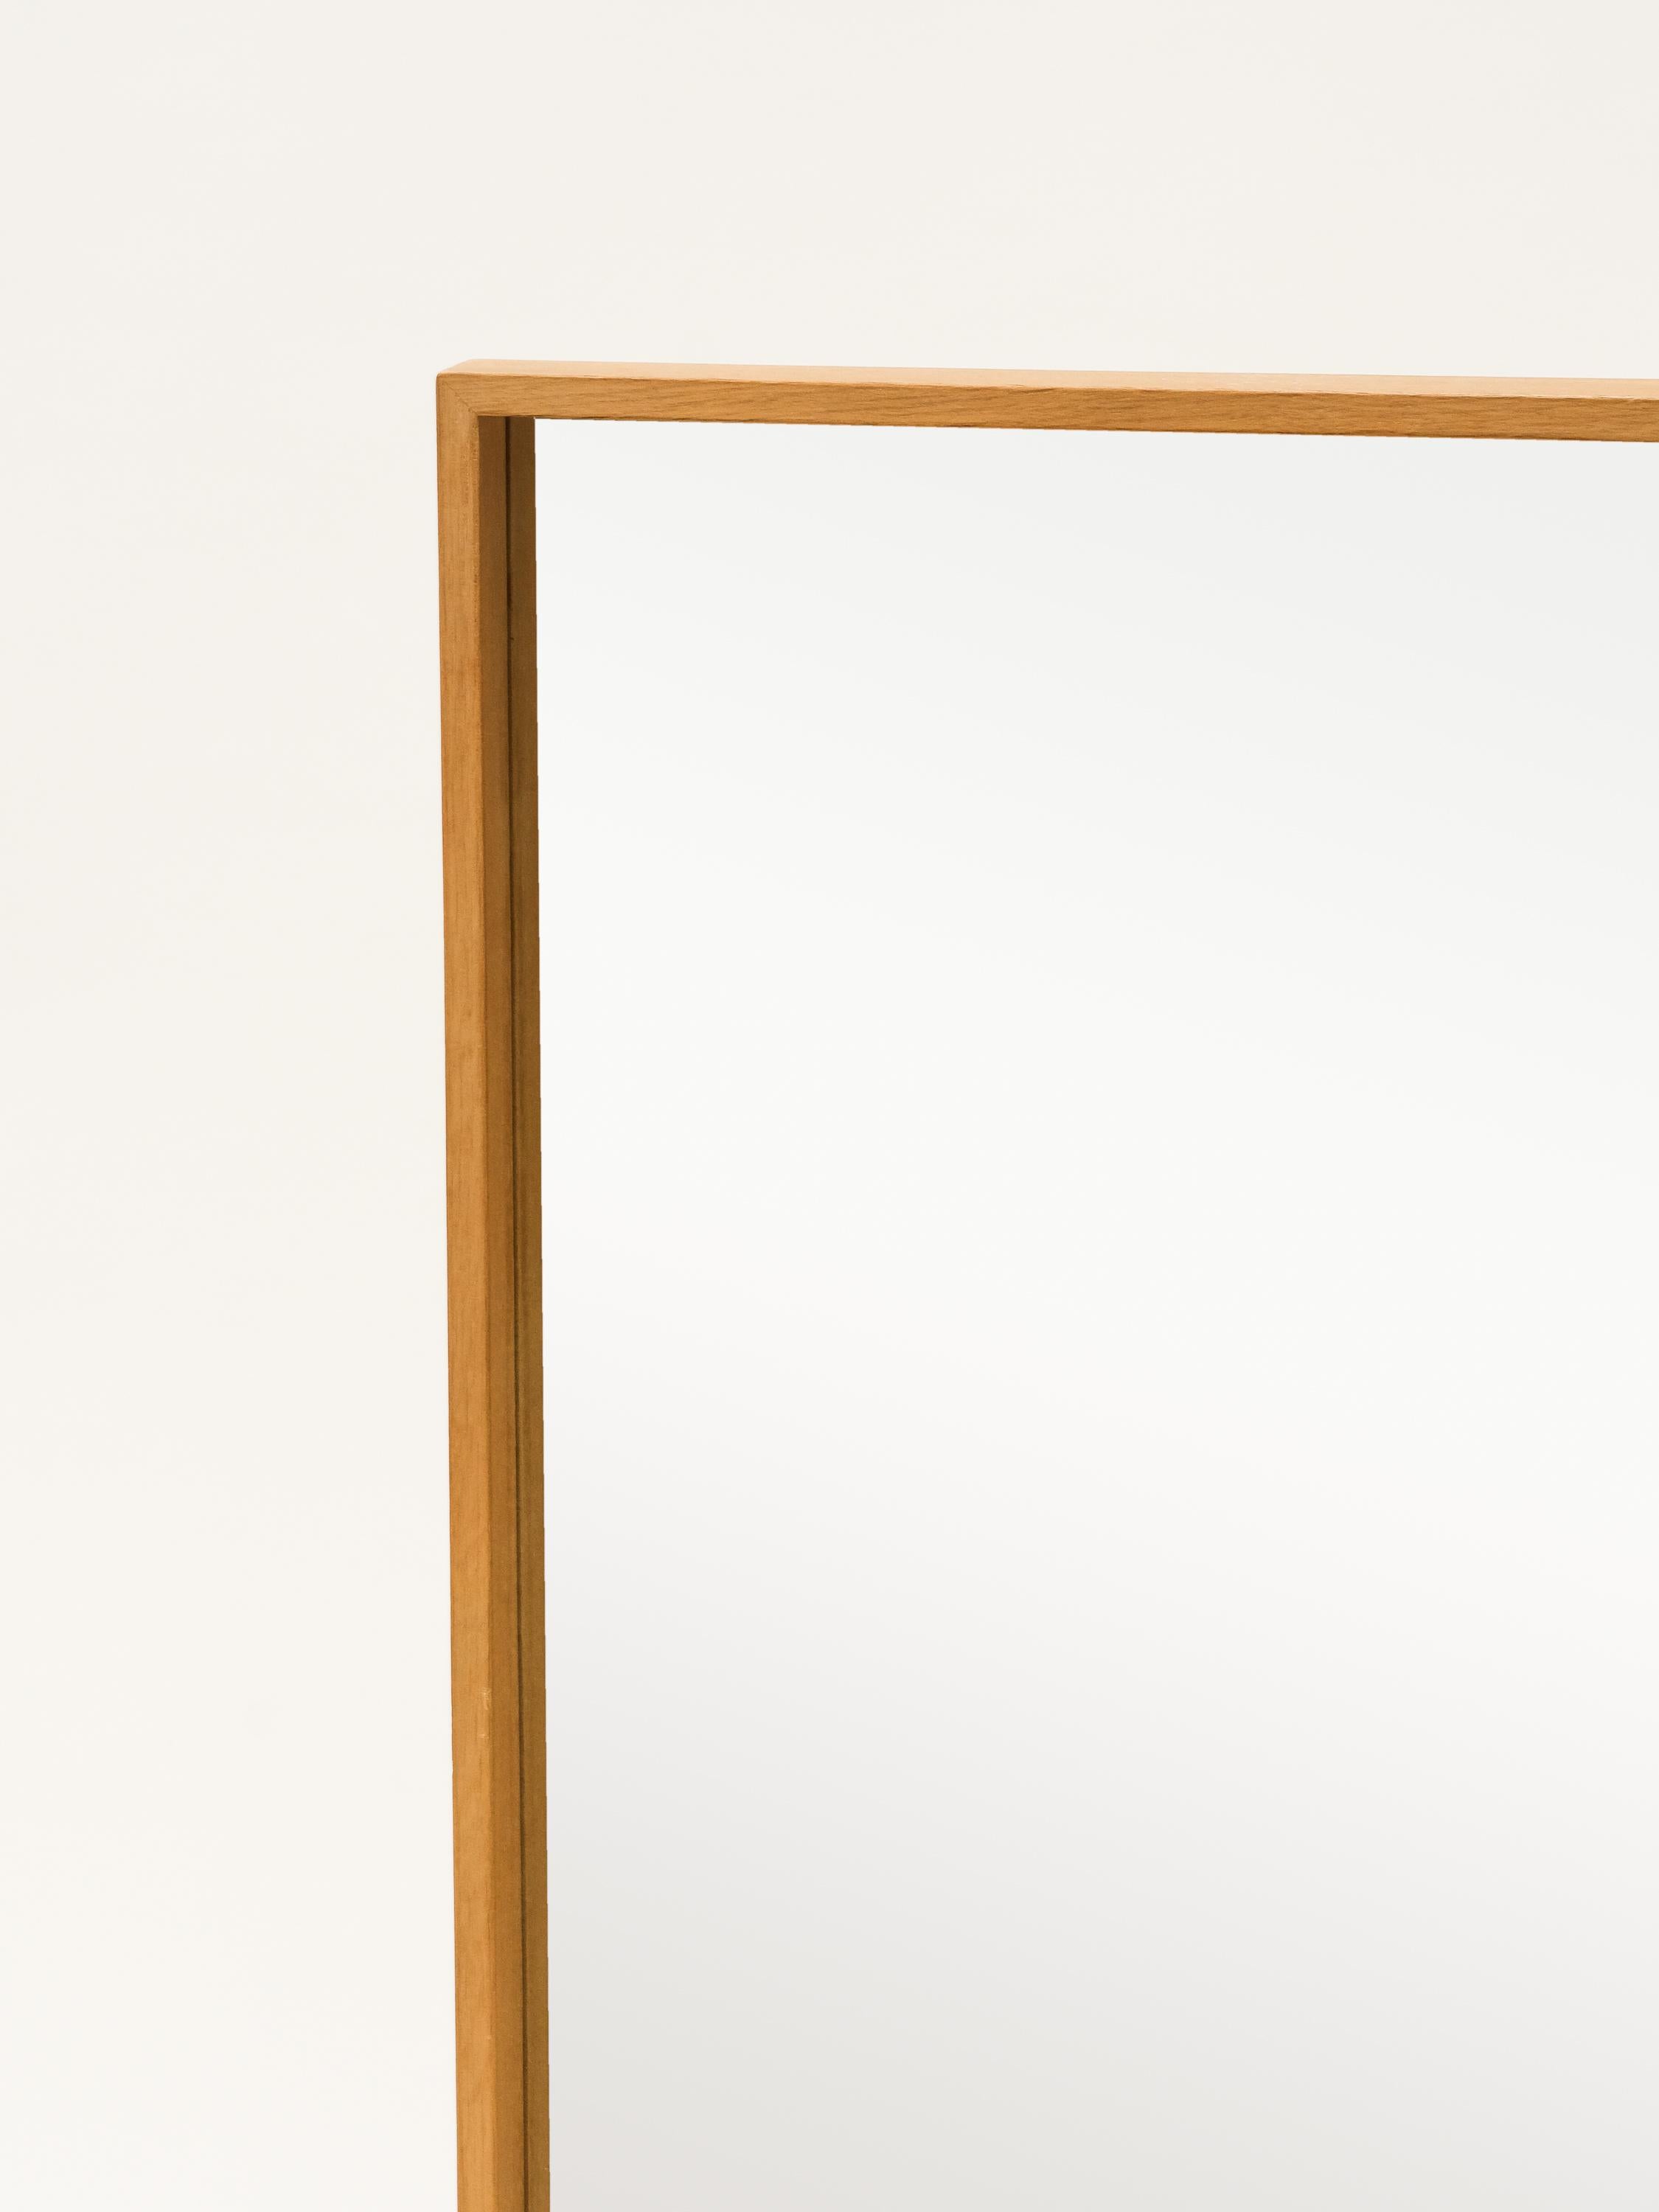 An elegant wall mirror by AB Glas & Trä Hovmantorp,. Manufactured in Sweden.

Oak frame and original glass.